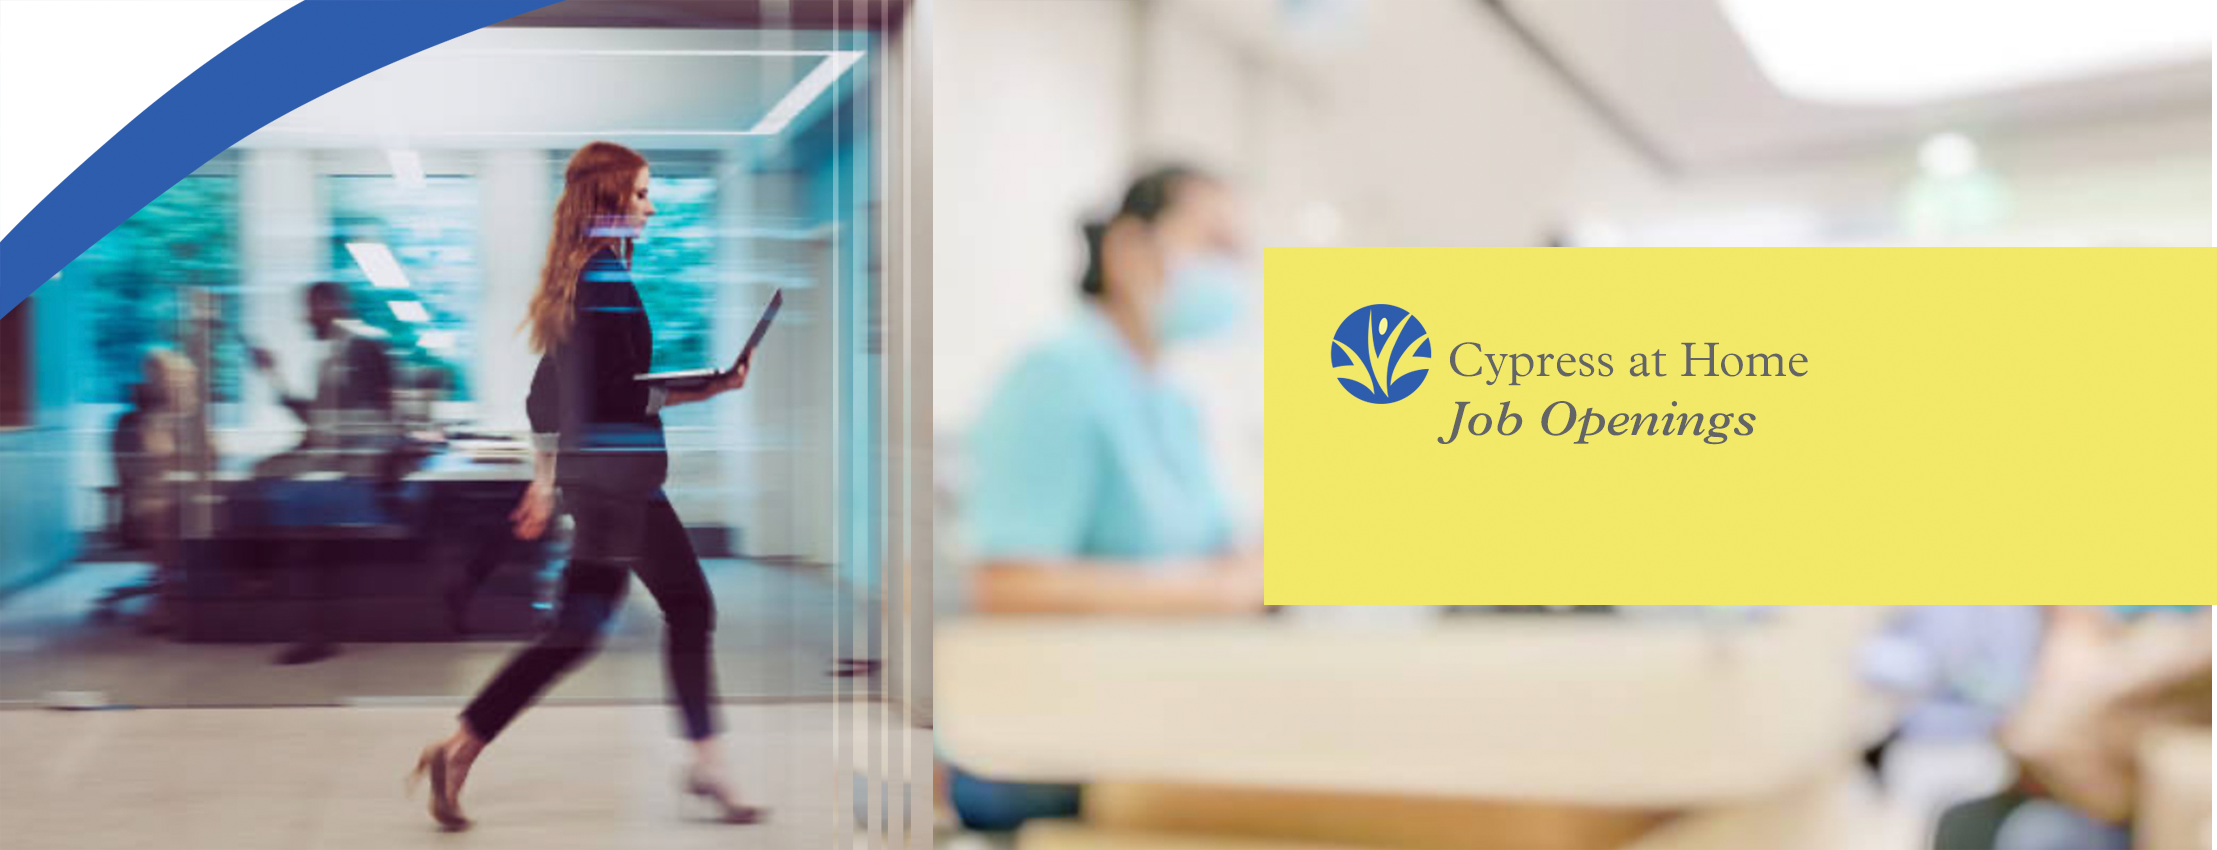 Cypress at Home Job Openings Fort Myers Florida